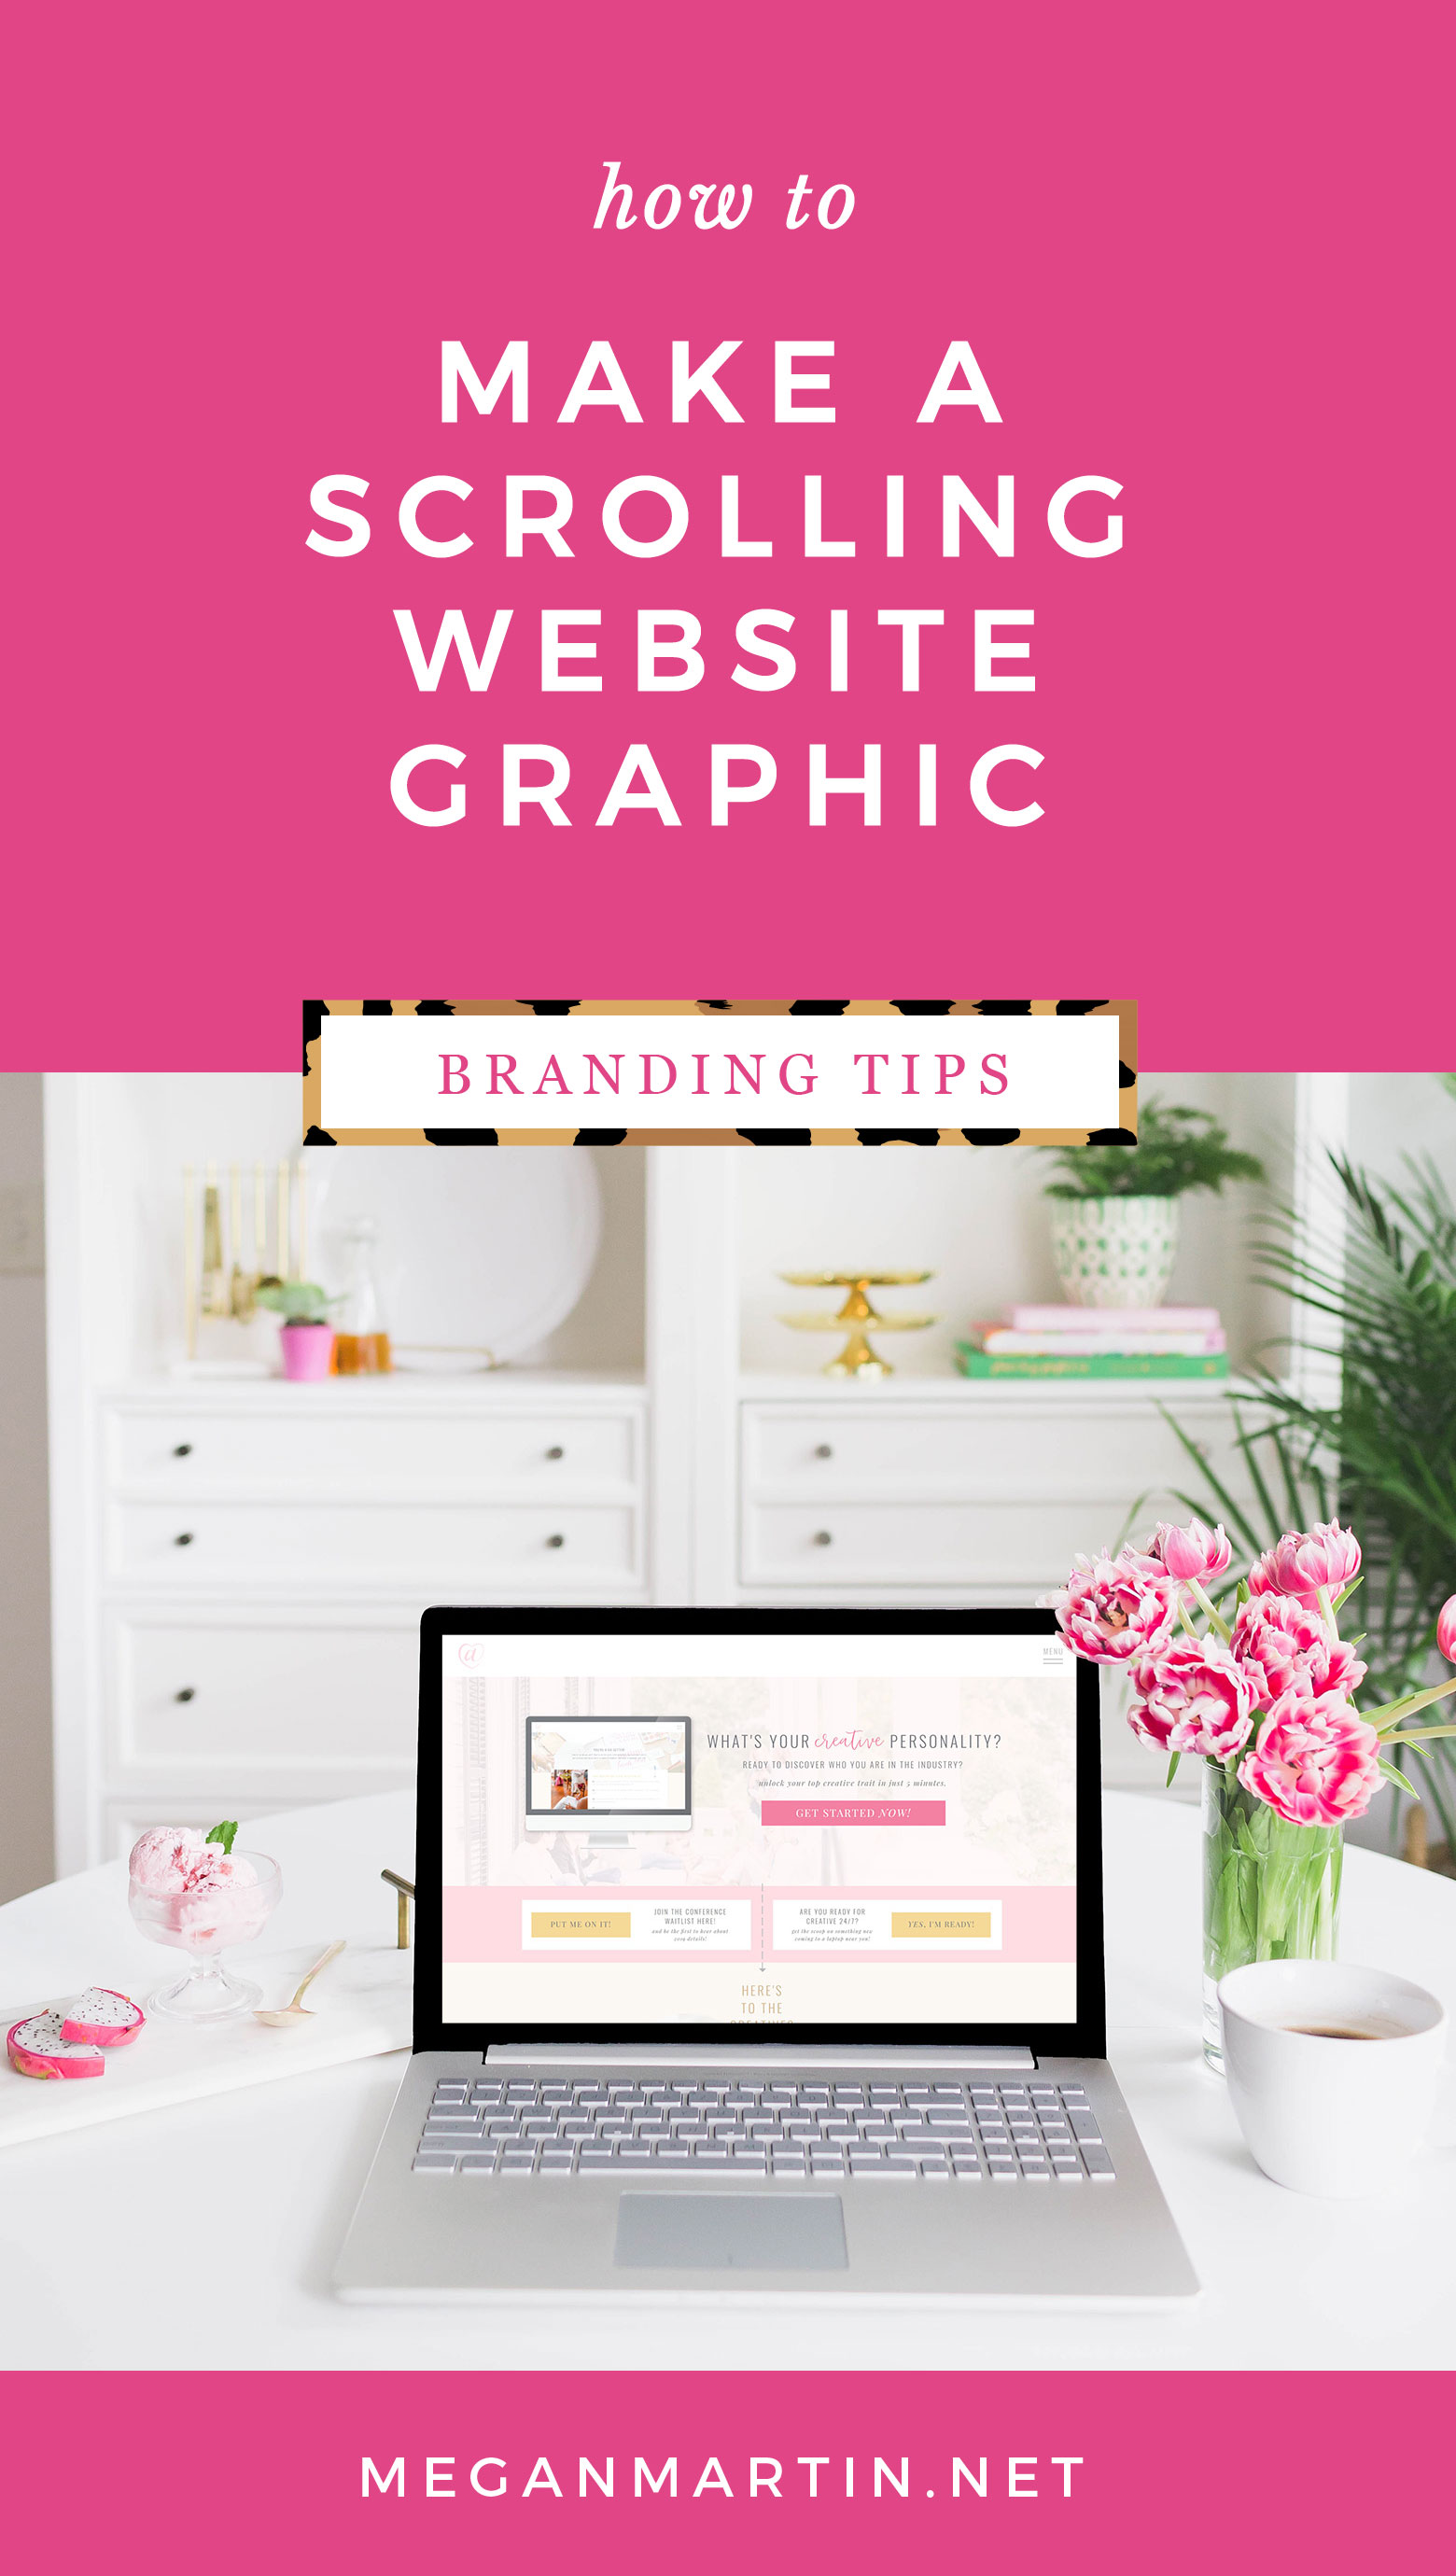 How to Make a Scrolling Website Graphic in Photoshop, Photoshop Tips, Graphic Design, Social Media Graphics, SC Stockshop, stock images, how to overlay an image on stock photos